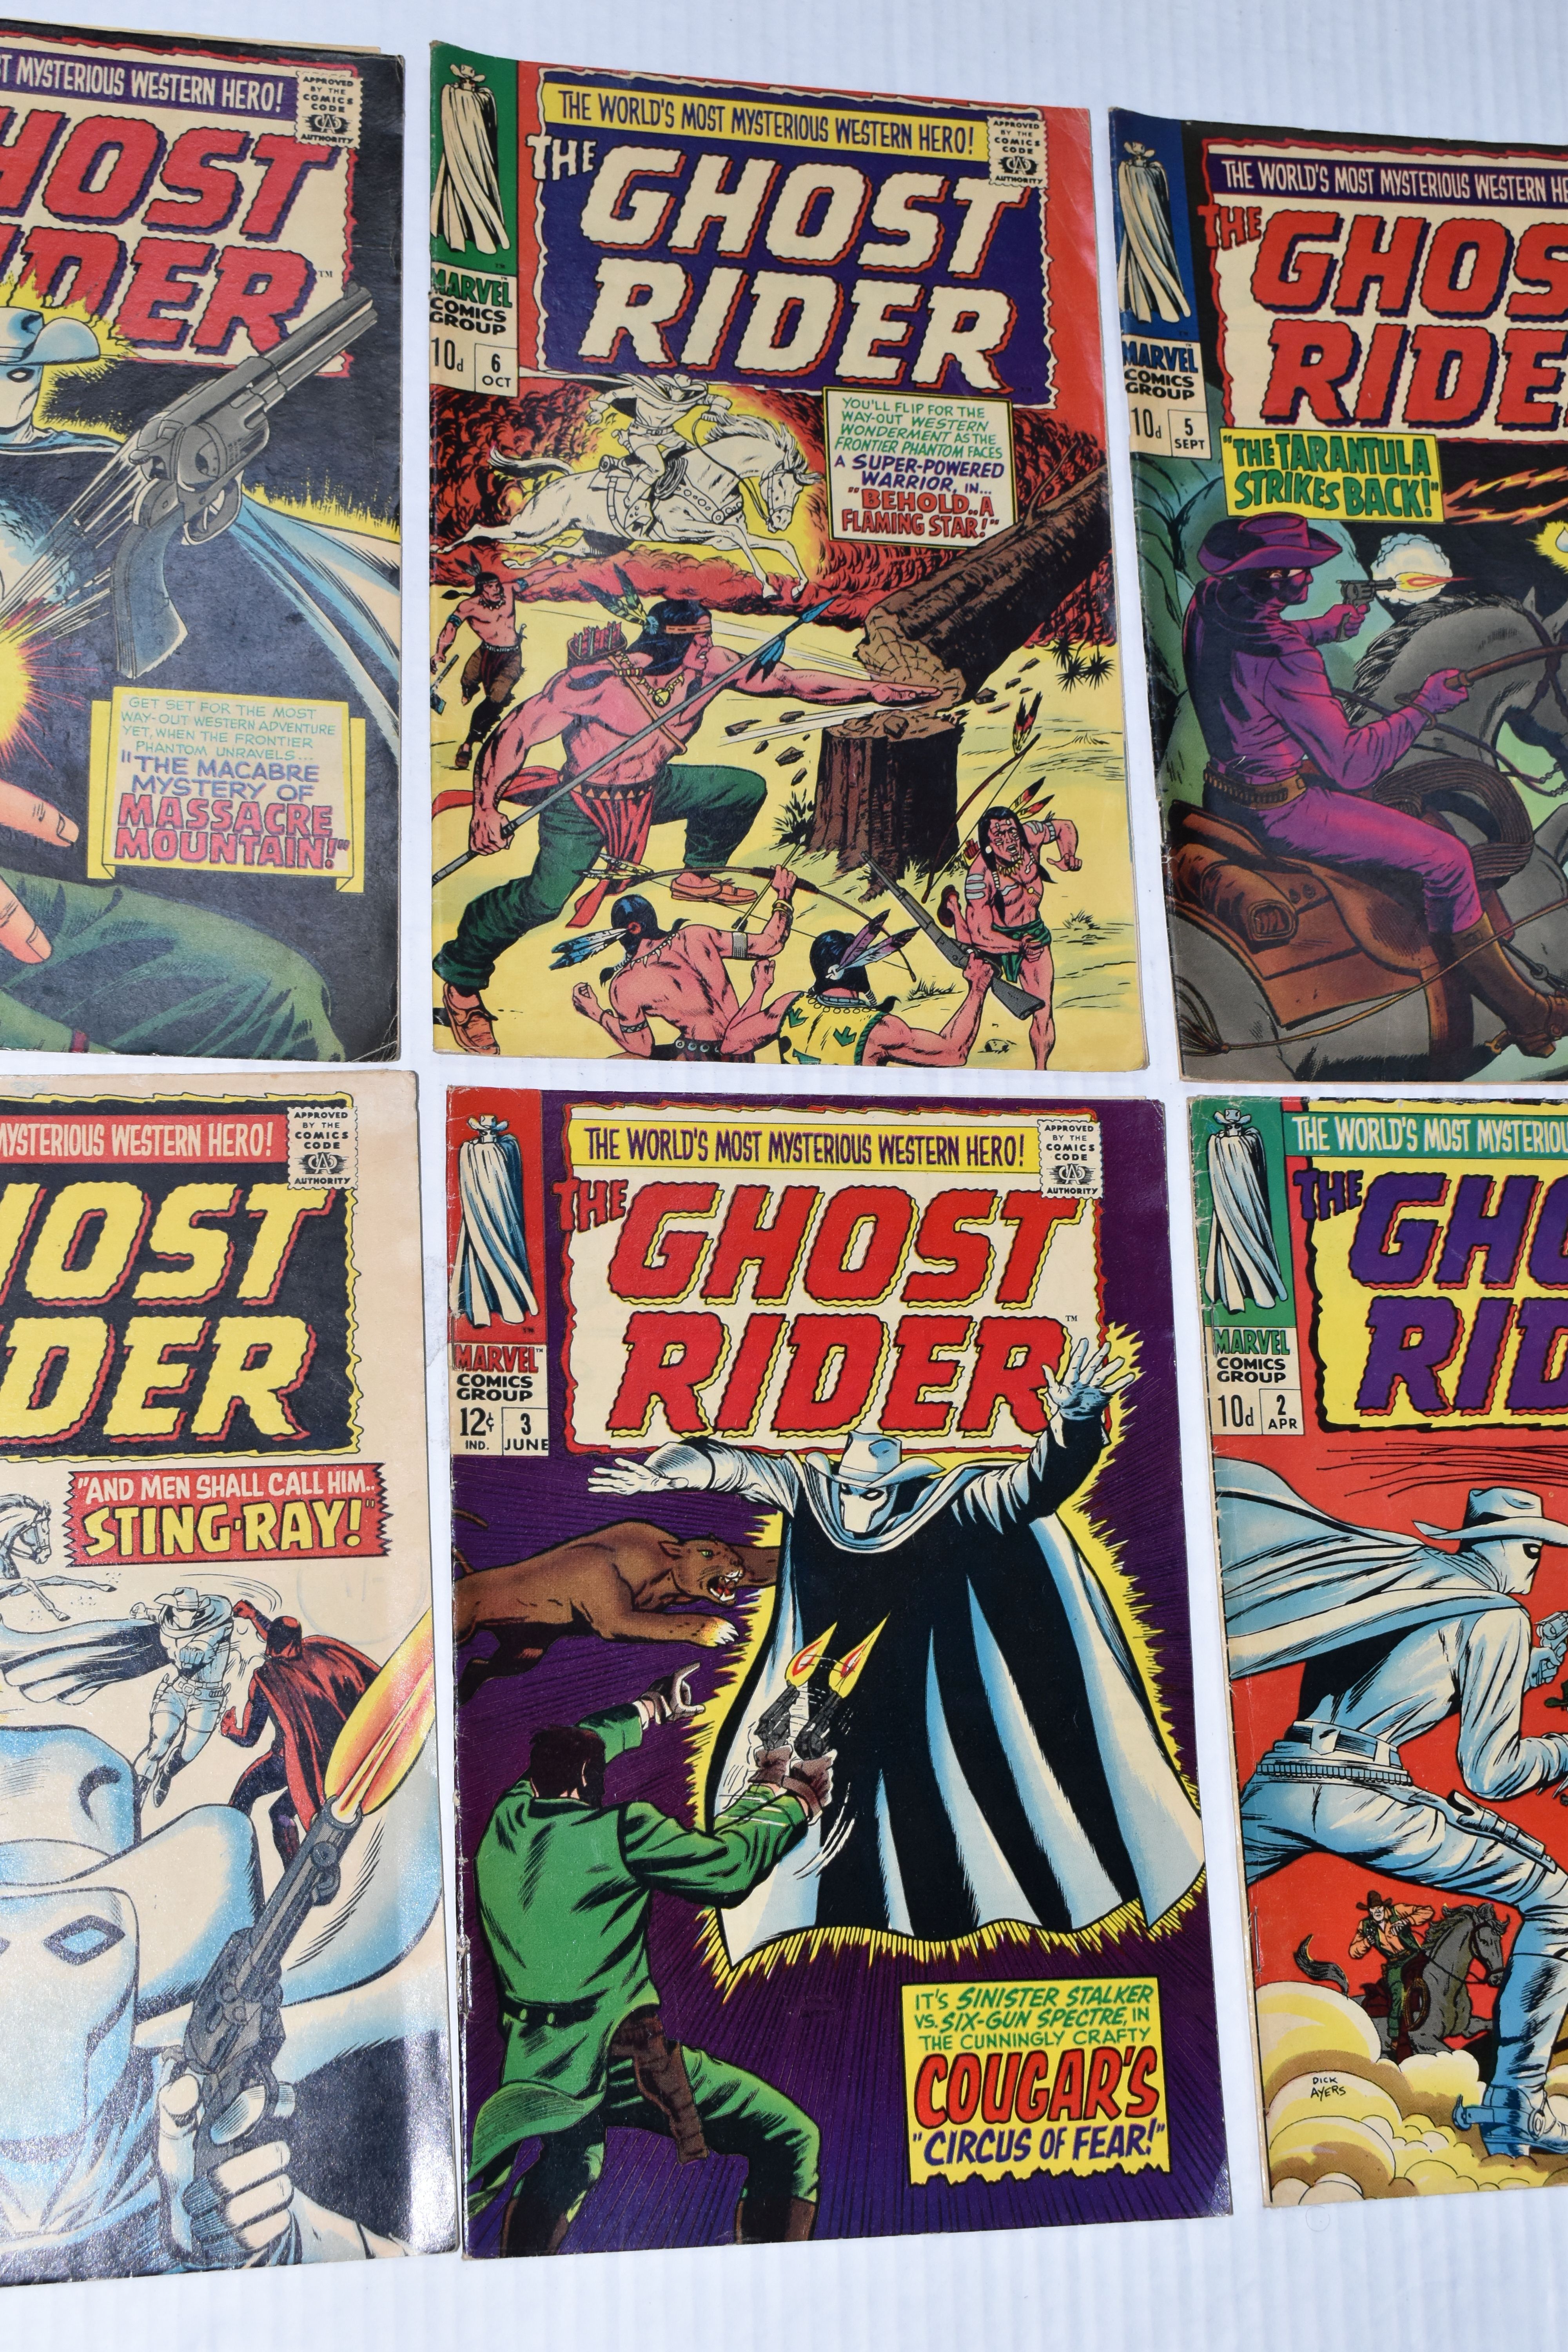 COMPLETE ORIGINAL GHOST RIDER VOLUME 1 MARVEL COMICS, features the first appearance of the - Image 3 of 25